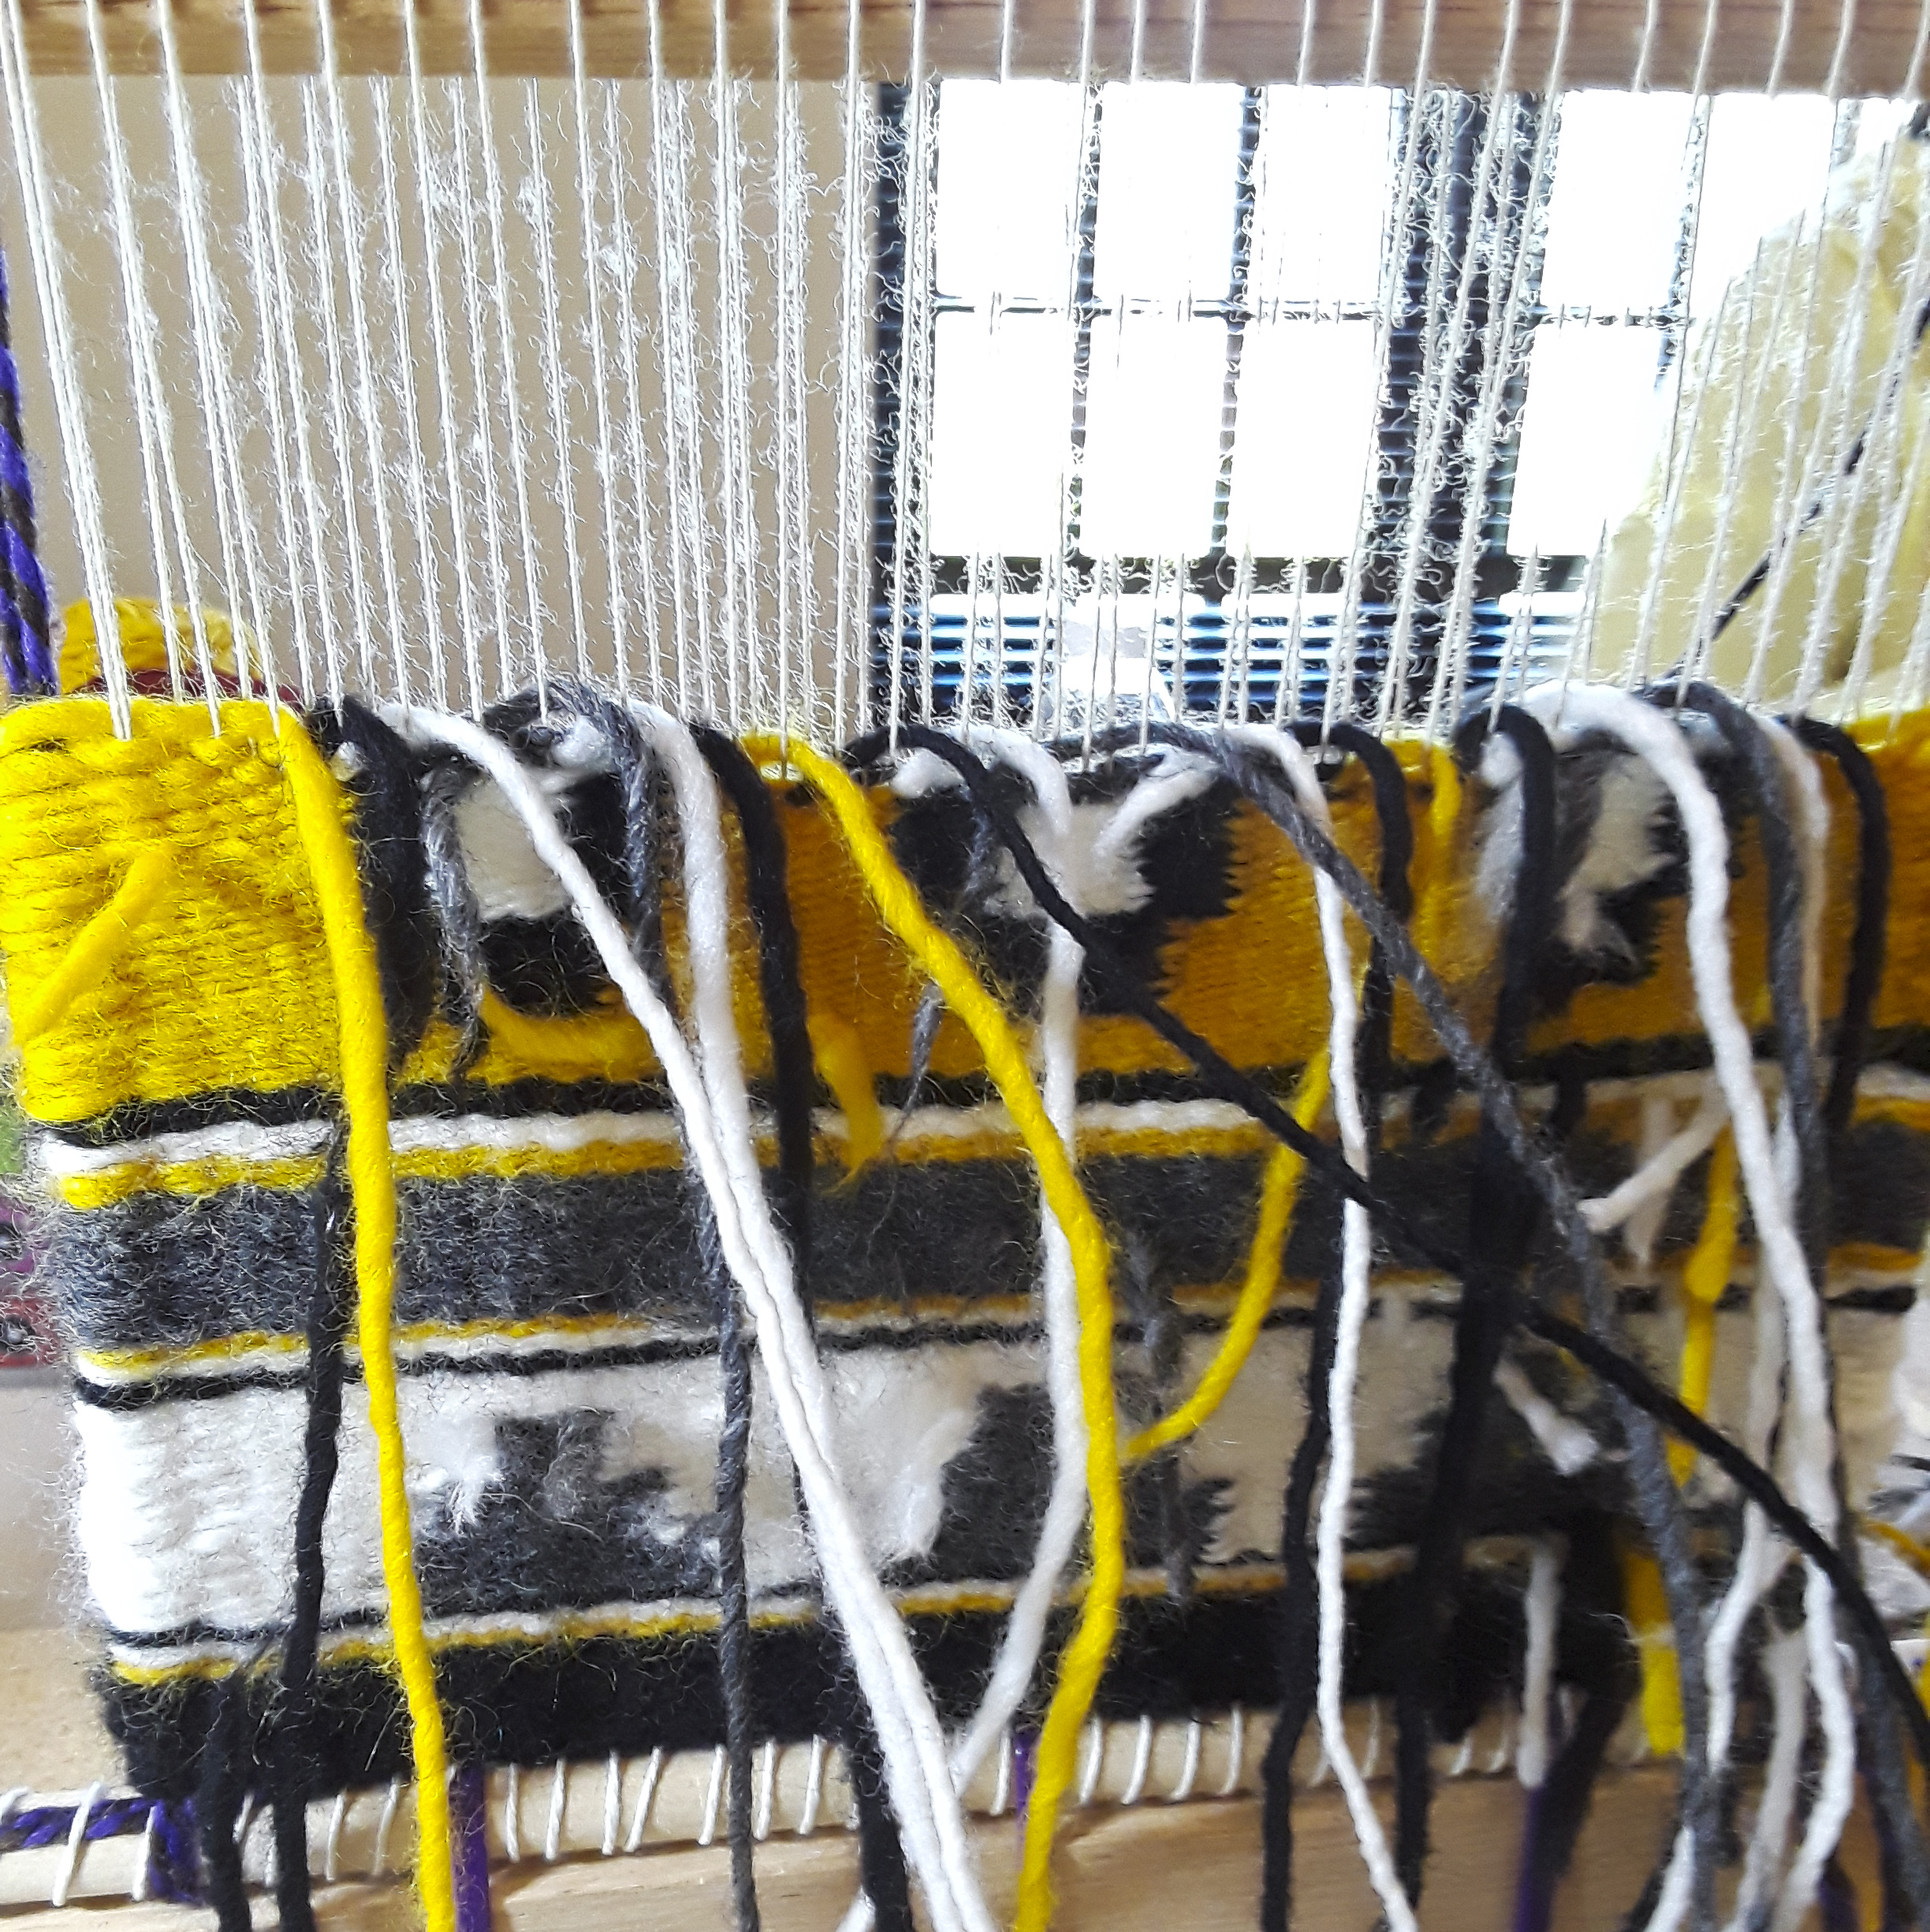 Detailed shot of the yarn woven on a loom.